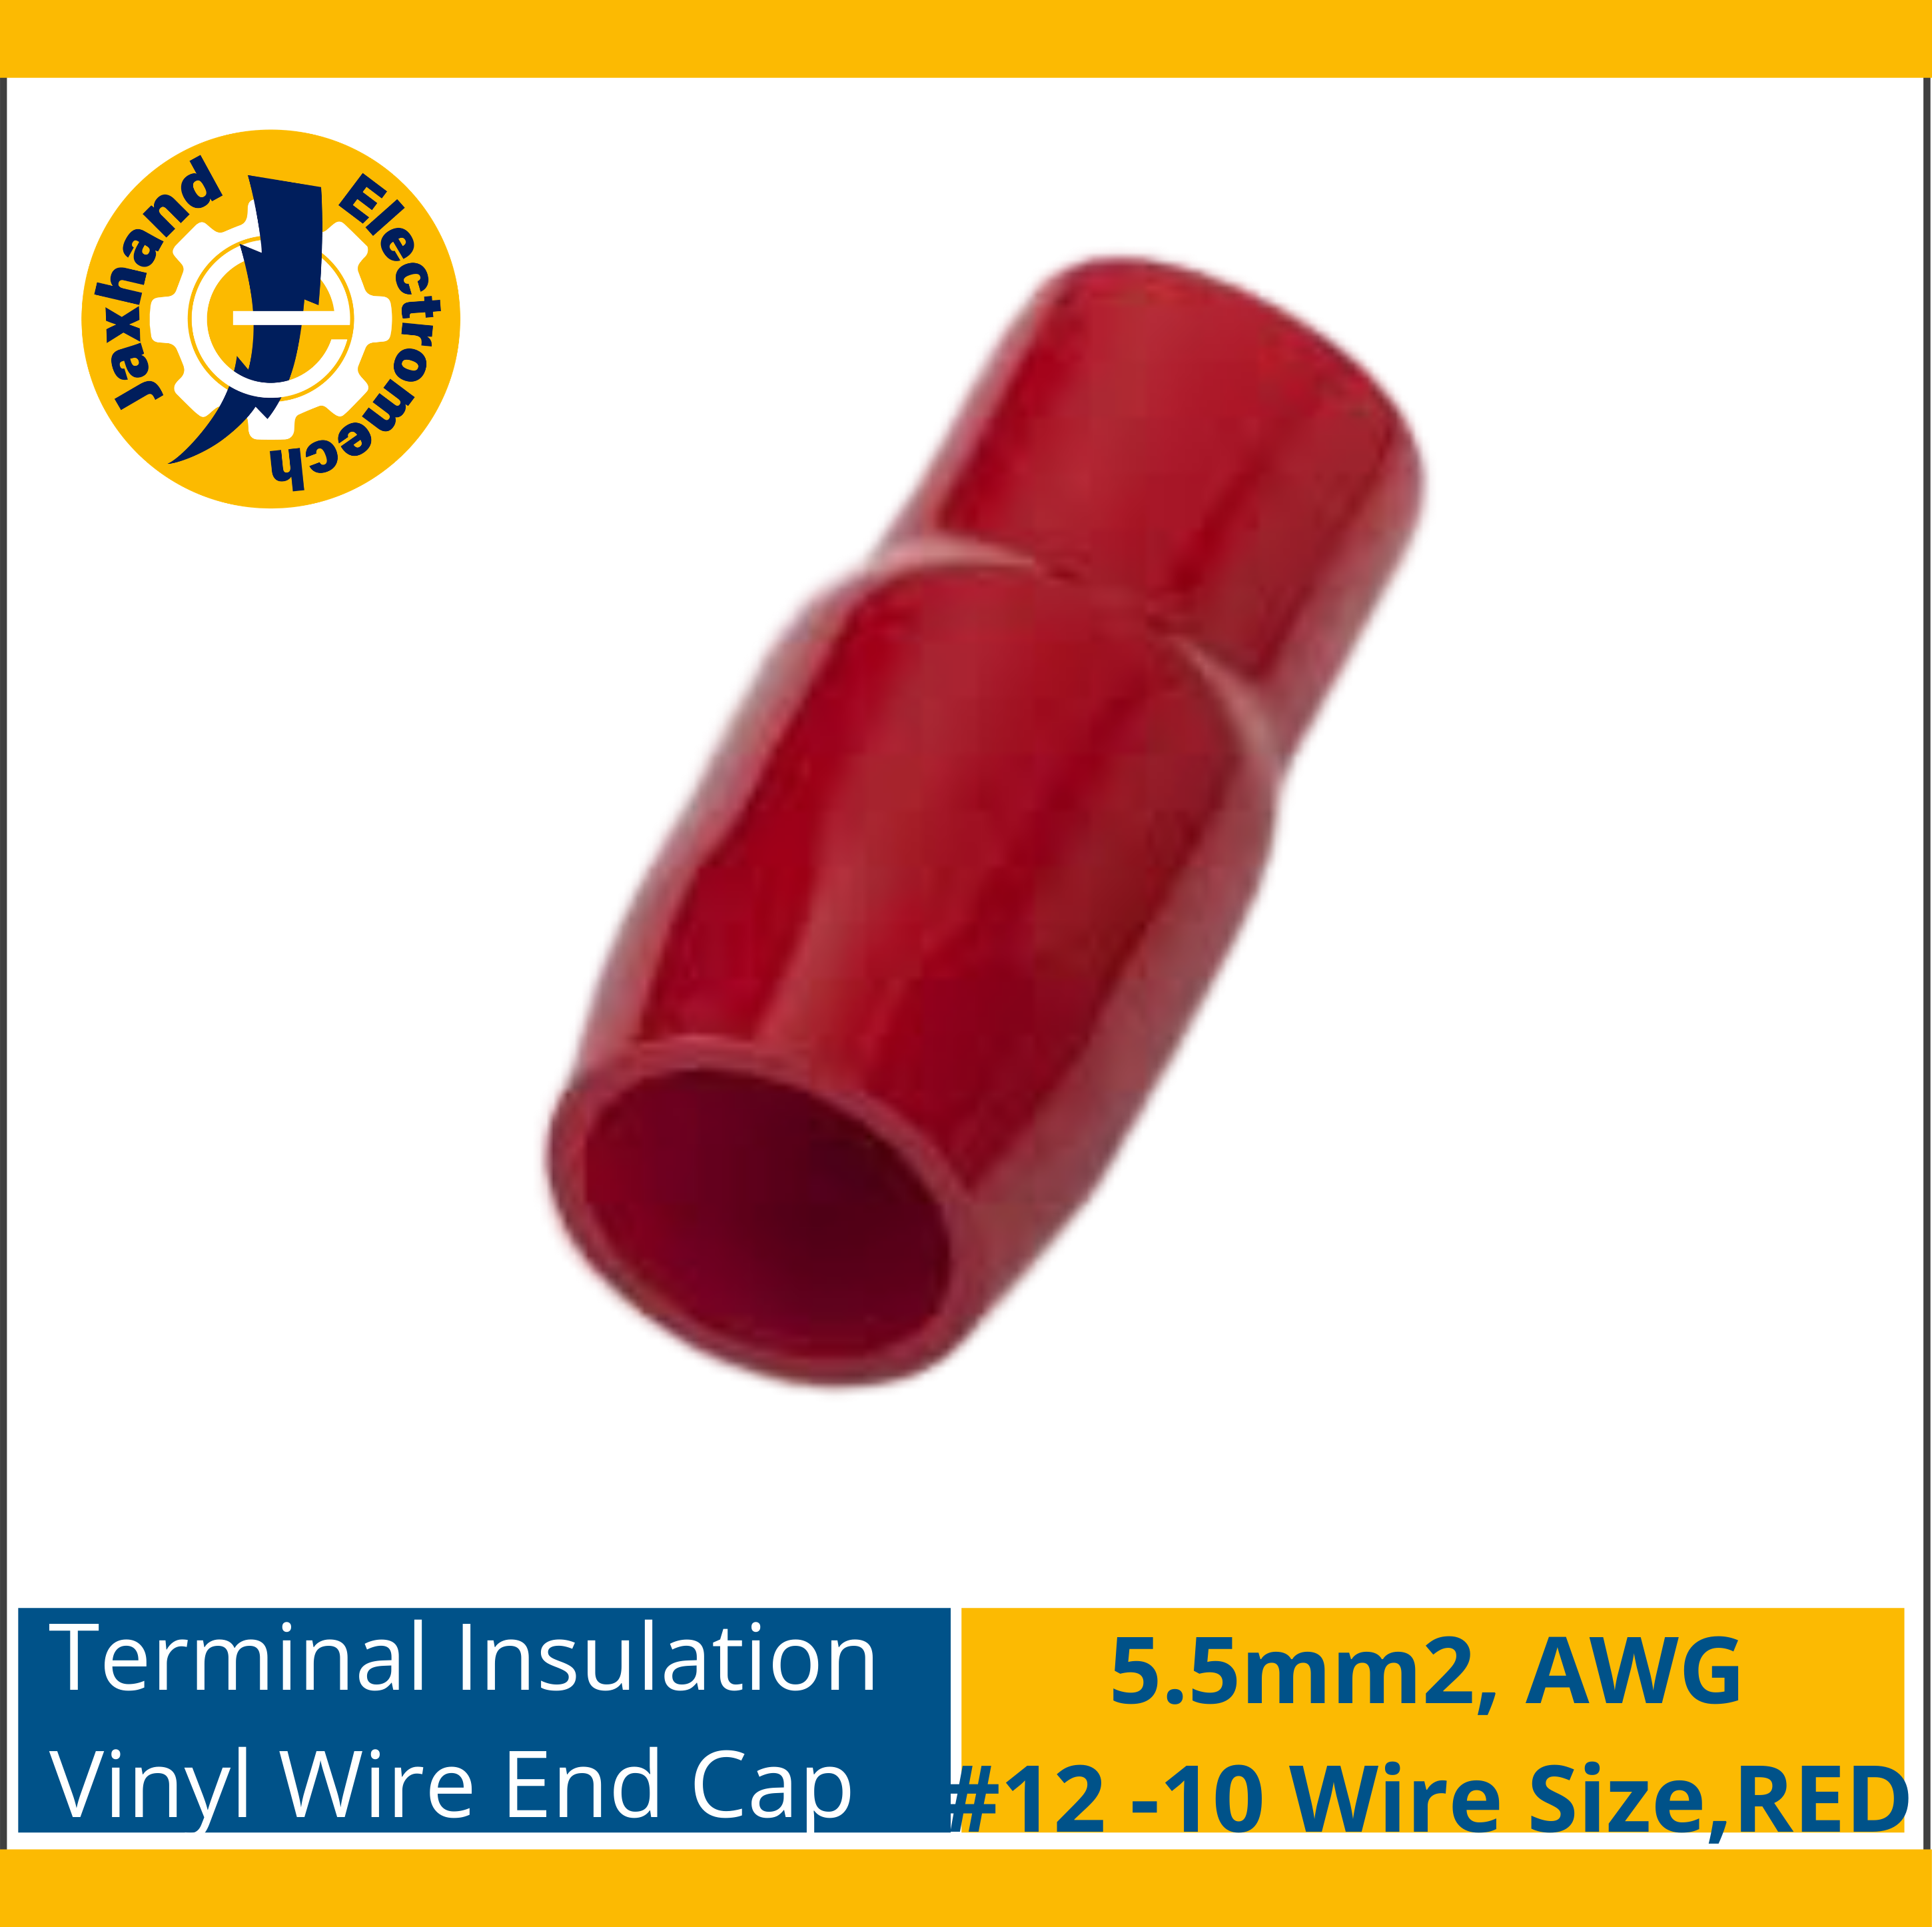 Terminal Insulation Vinyl Wire End Cap Red 2.0mm2, AWG #16 - #14 Wire Size